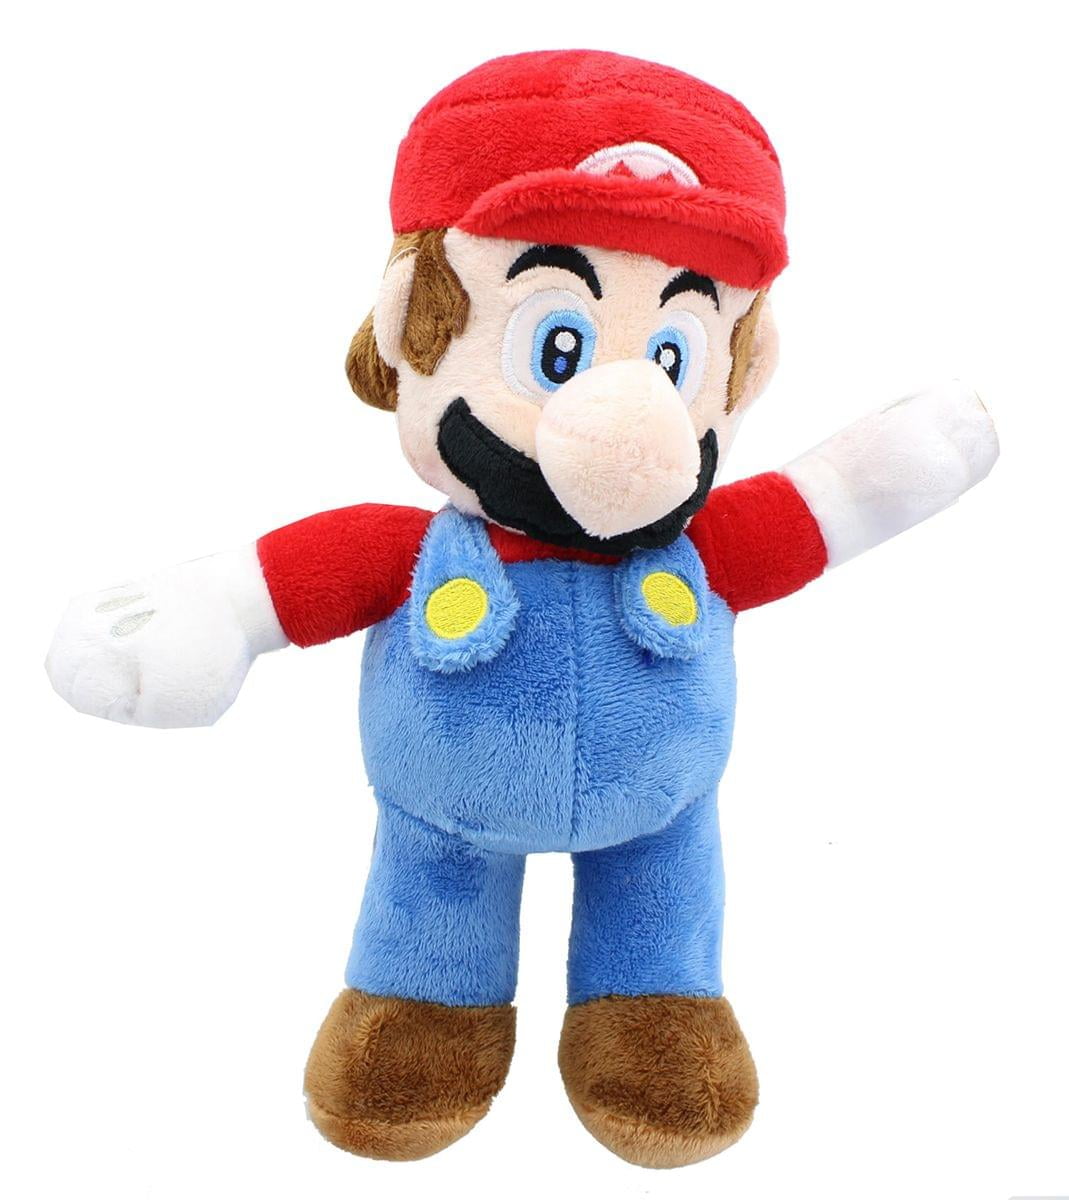 Super Mario Bros Plush Toy Character Soft Stuffed Animal Collectible Variations 